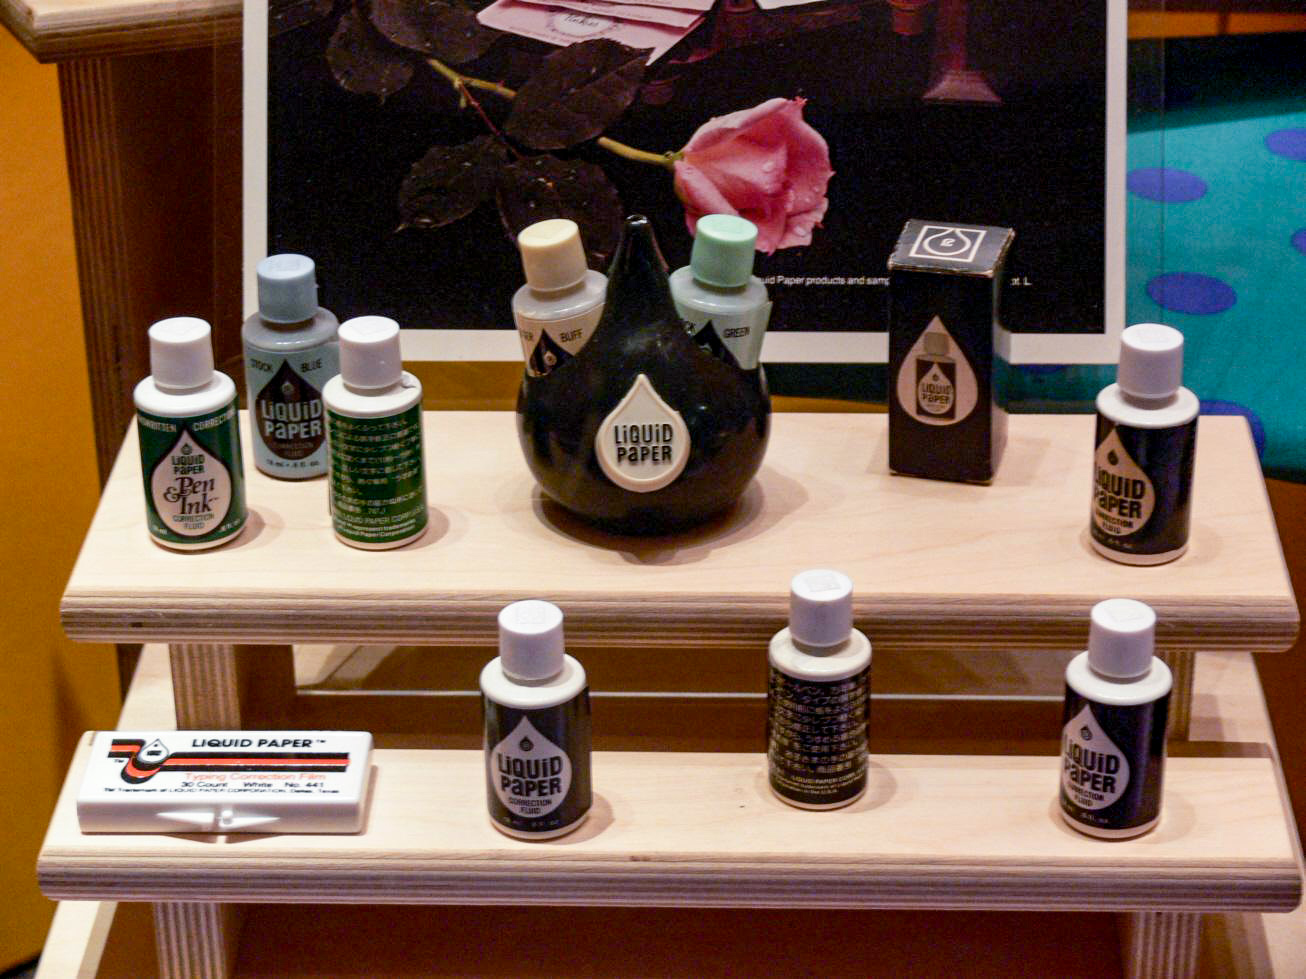 A colored photograph of a museum display showing several small bottles of Liquid Paper correction fluid in various colors.